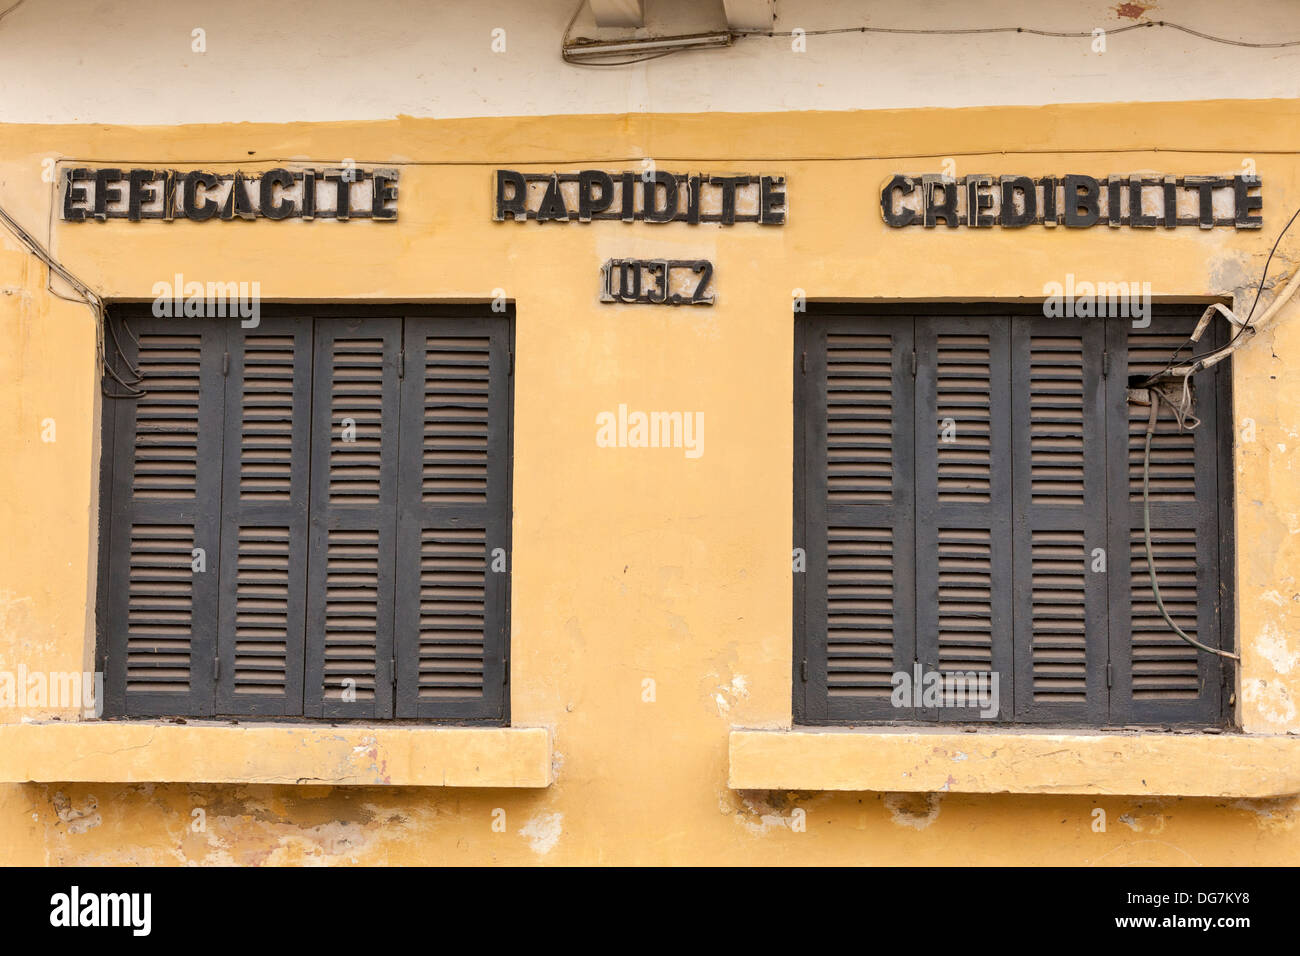 Senegal, Saint Louis. 'Efficiency, Rapidity, Credibility' on a Building from the French Colonial Era. Stock Photo